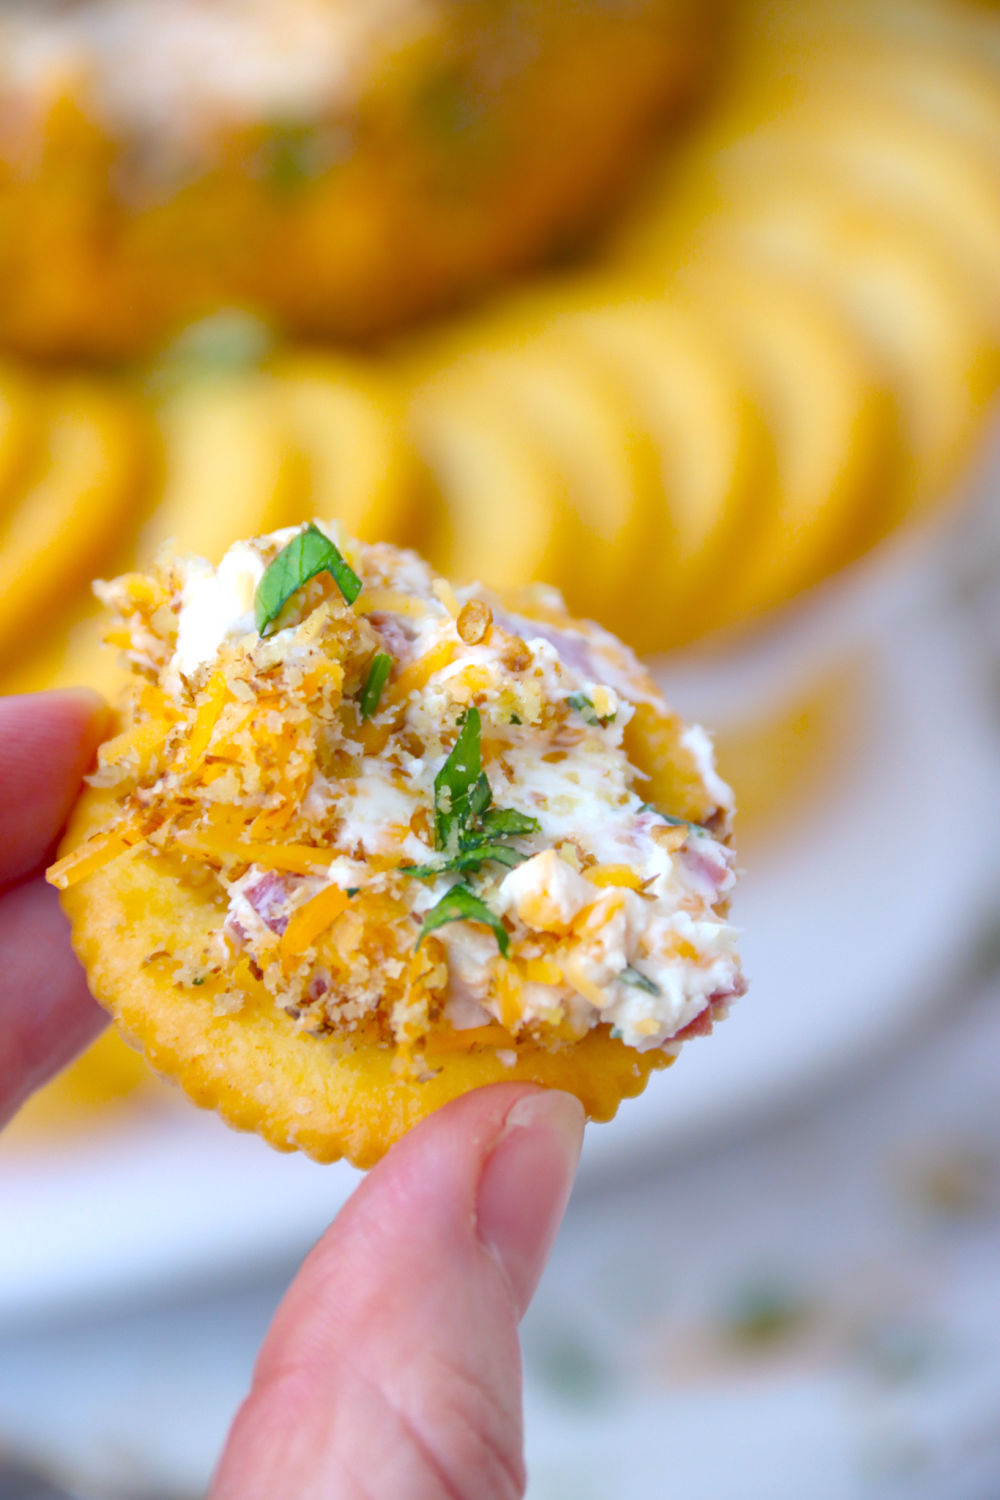 cracker filled with cheese ball mixture